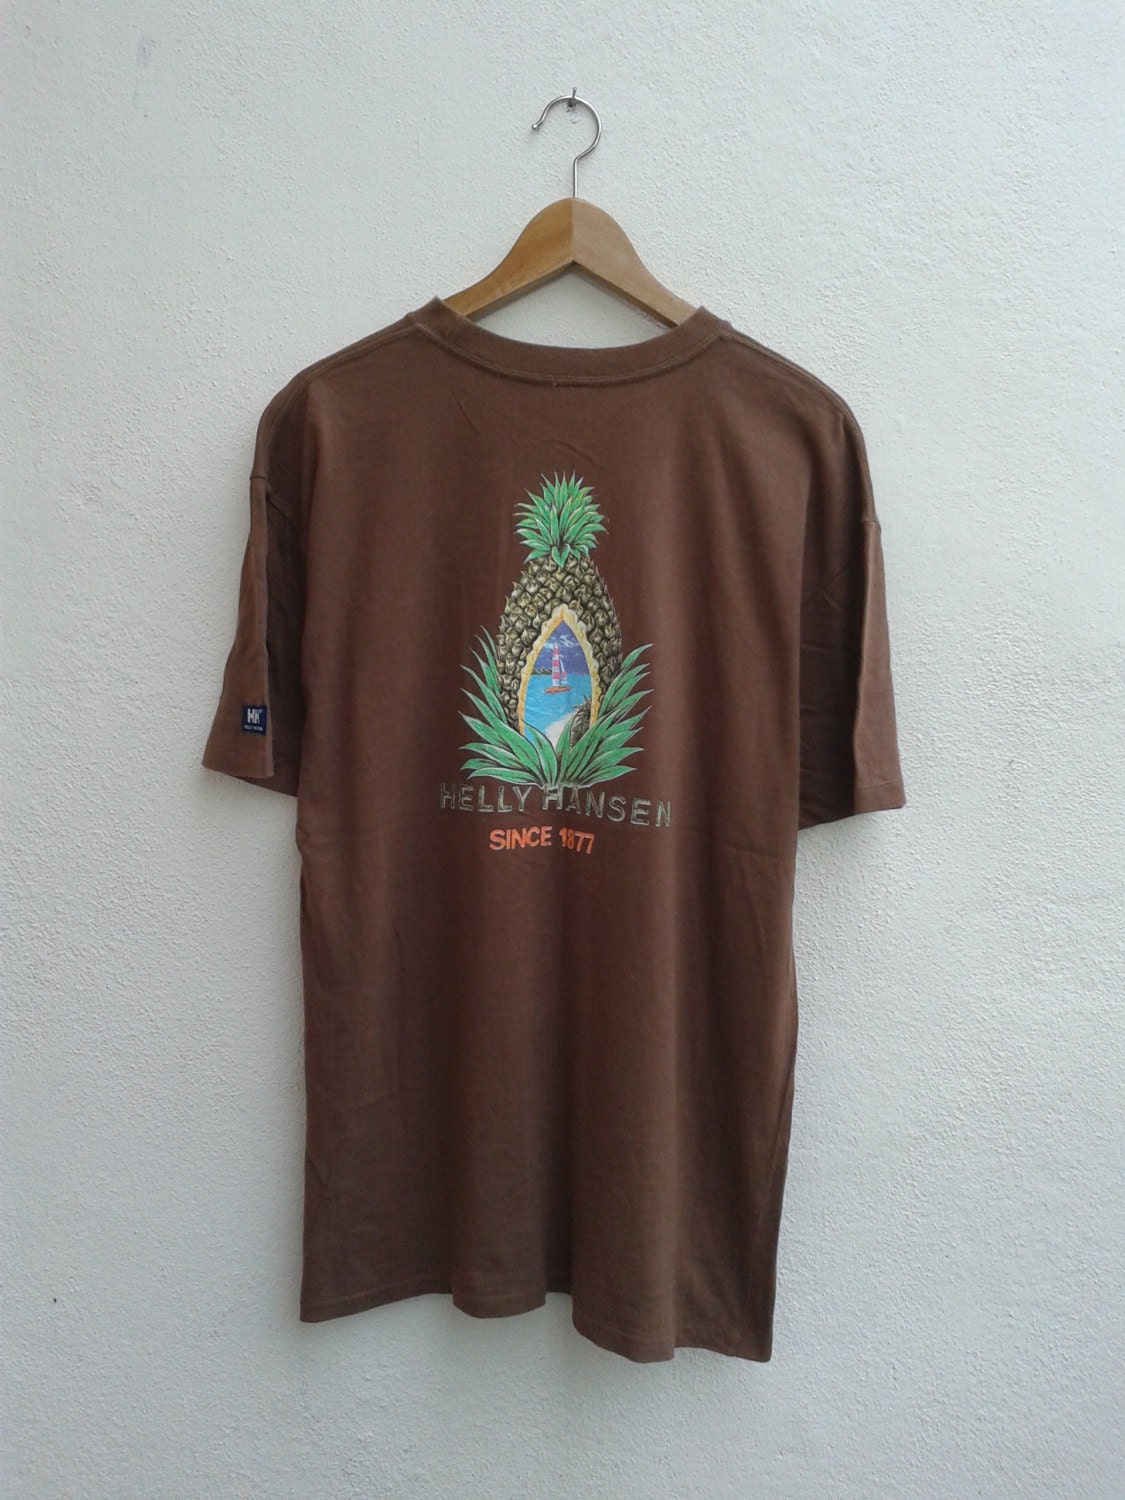 ON SALE 25% Vintage 90s Helly Hansen Yatch Pineapple Graphic Sailing ...